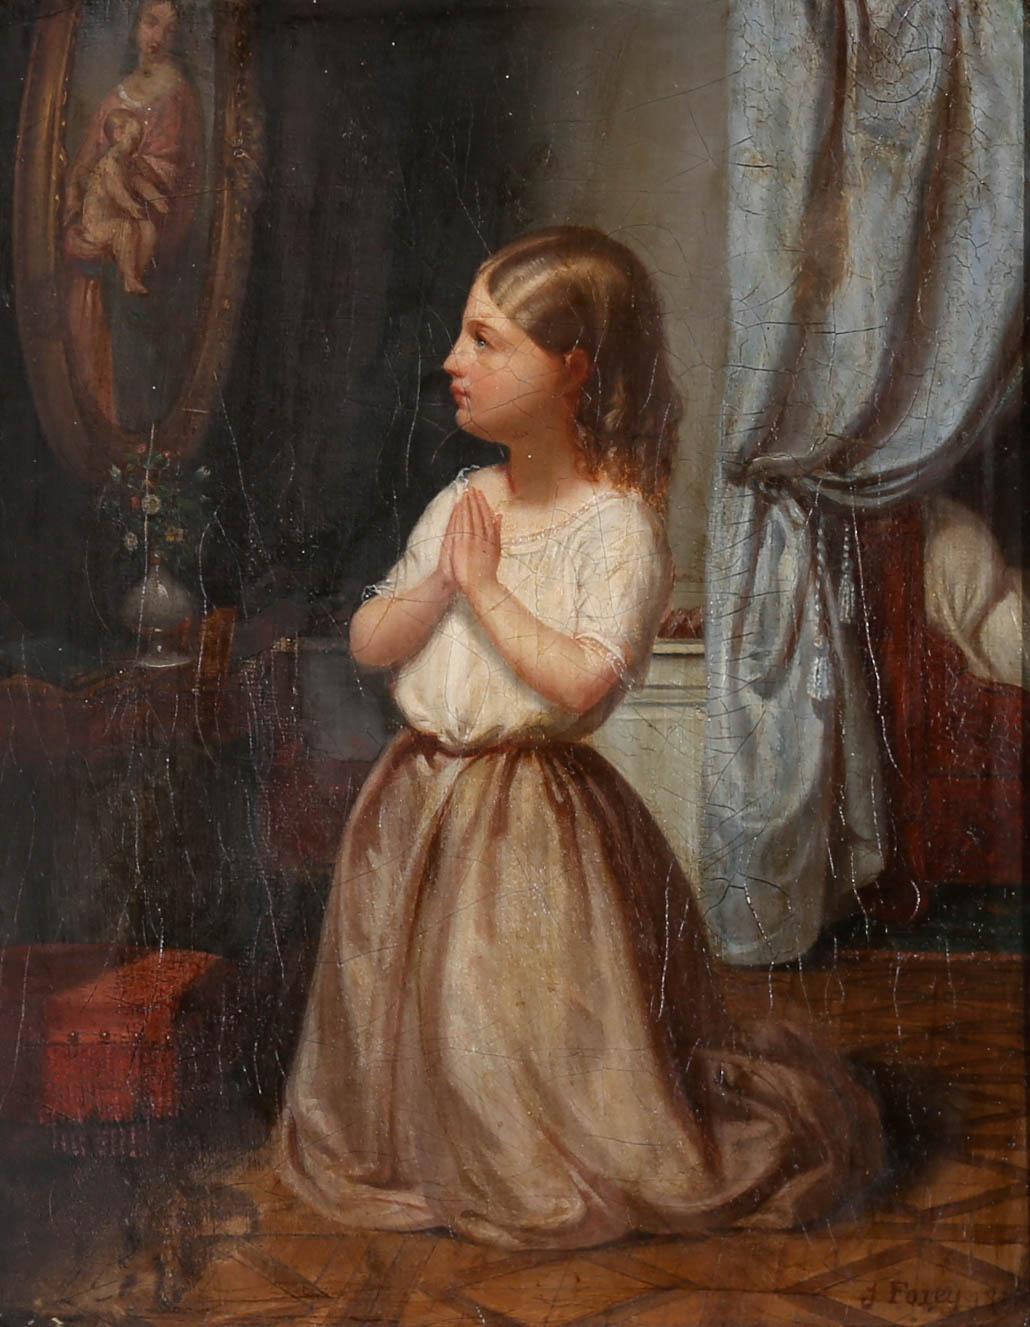 A charming interior scene in oil from the mid 19th Century, showing a pretty, blonde haired child kneeling before a painting of the Madonna and Child, hands clasped at her chest in prayer. The scene is far from solemn, despite the pious nature of